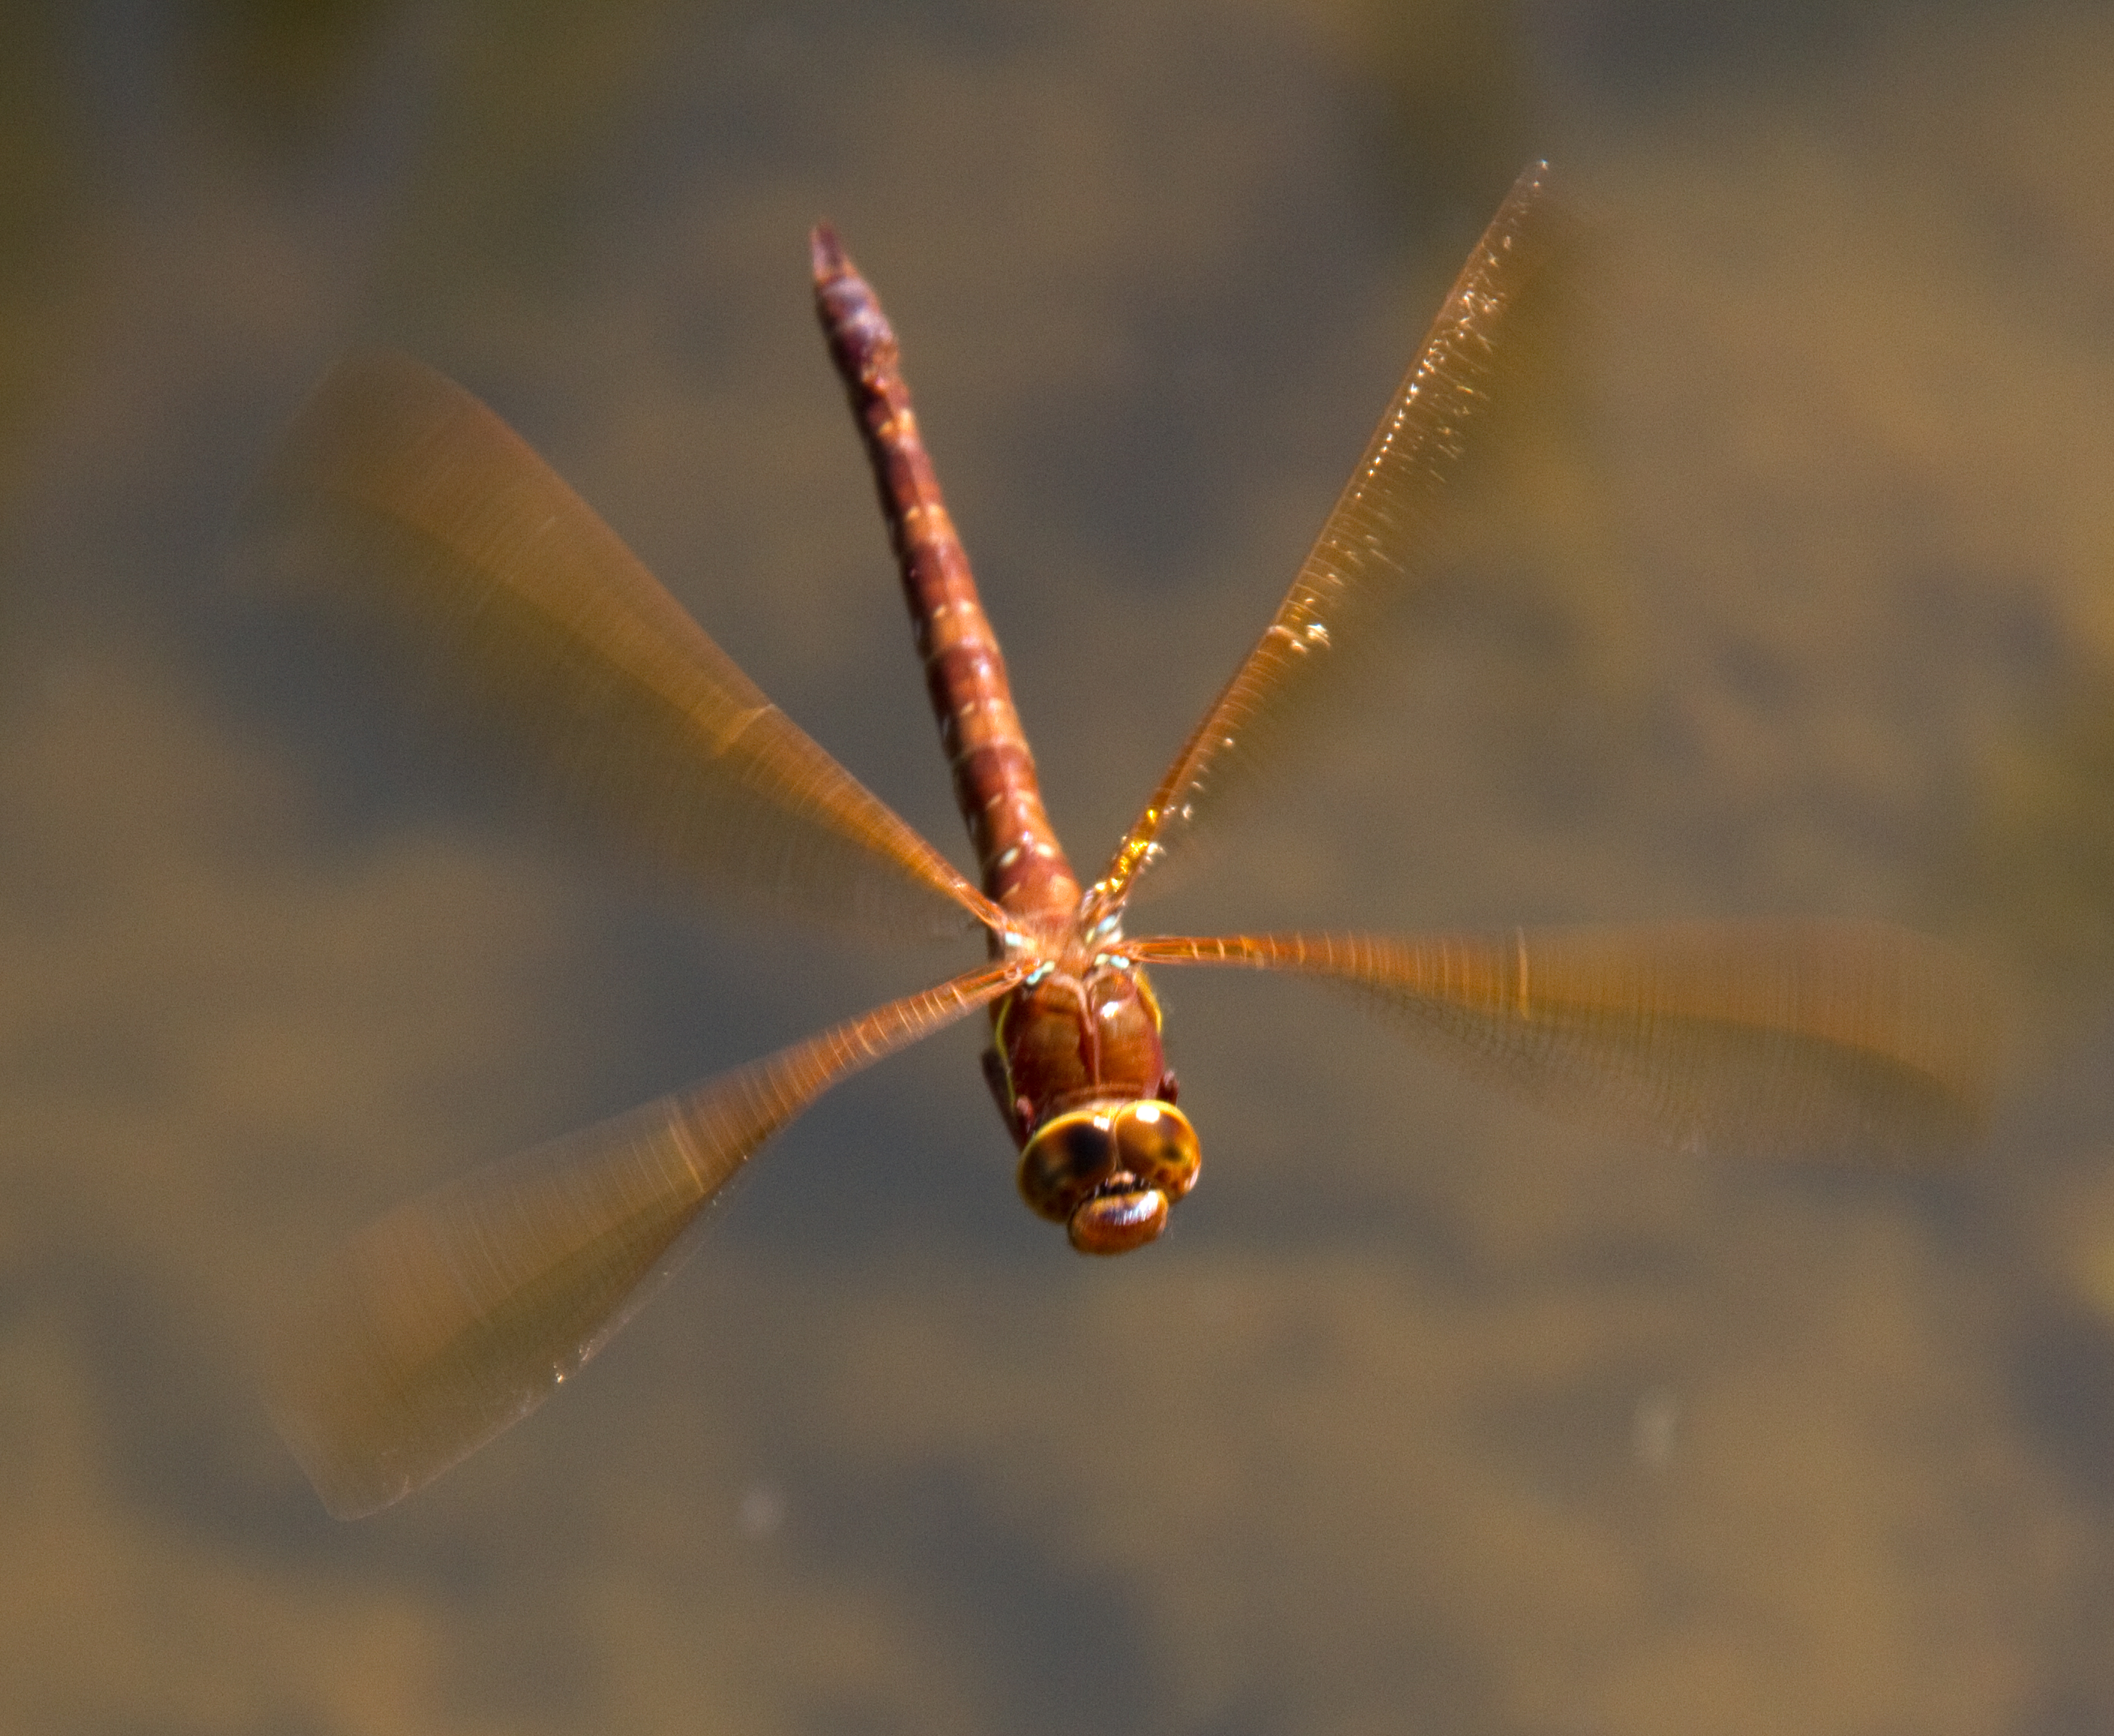 File:Brown Dragonfly 1 (7622685534).jpg - Wikimedia Commons